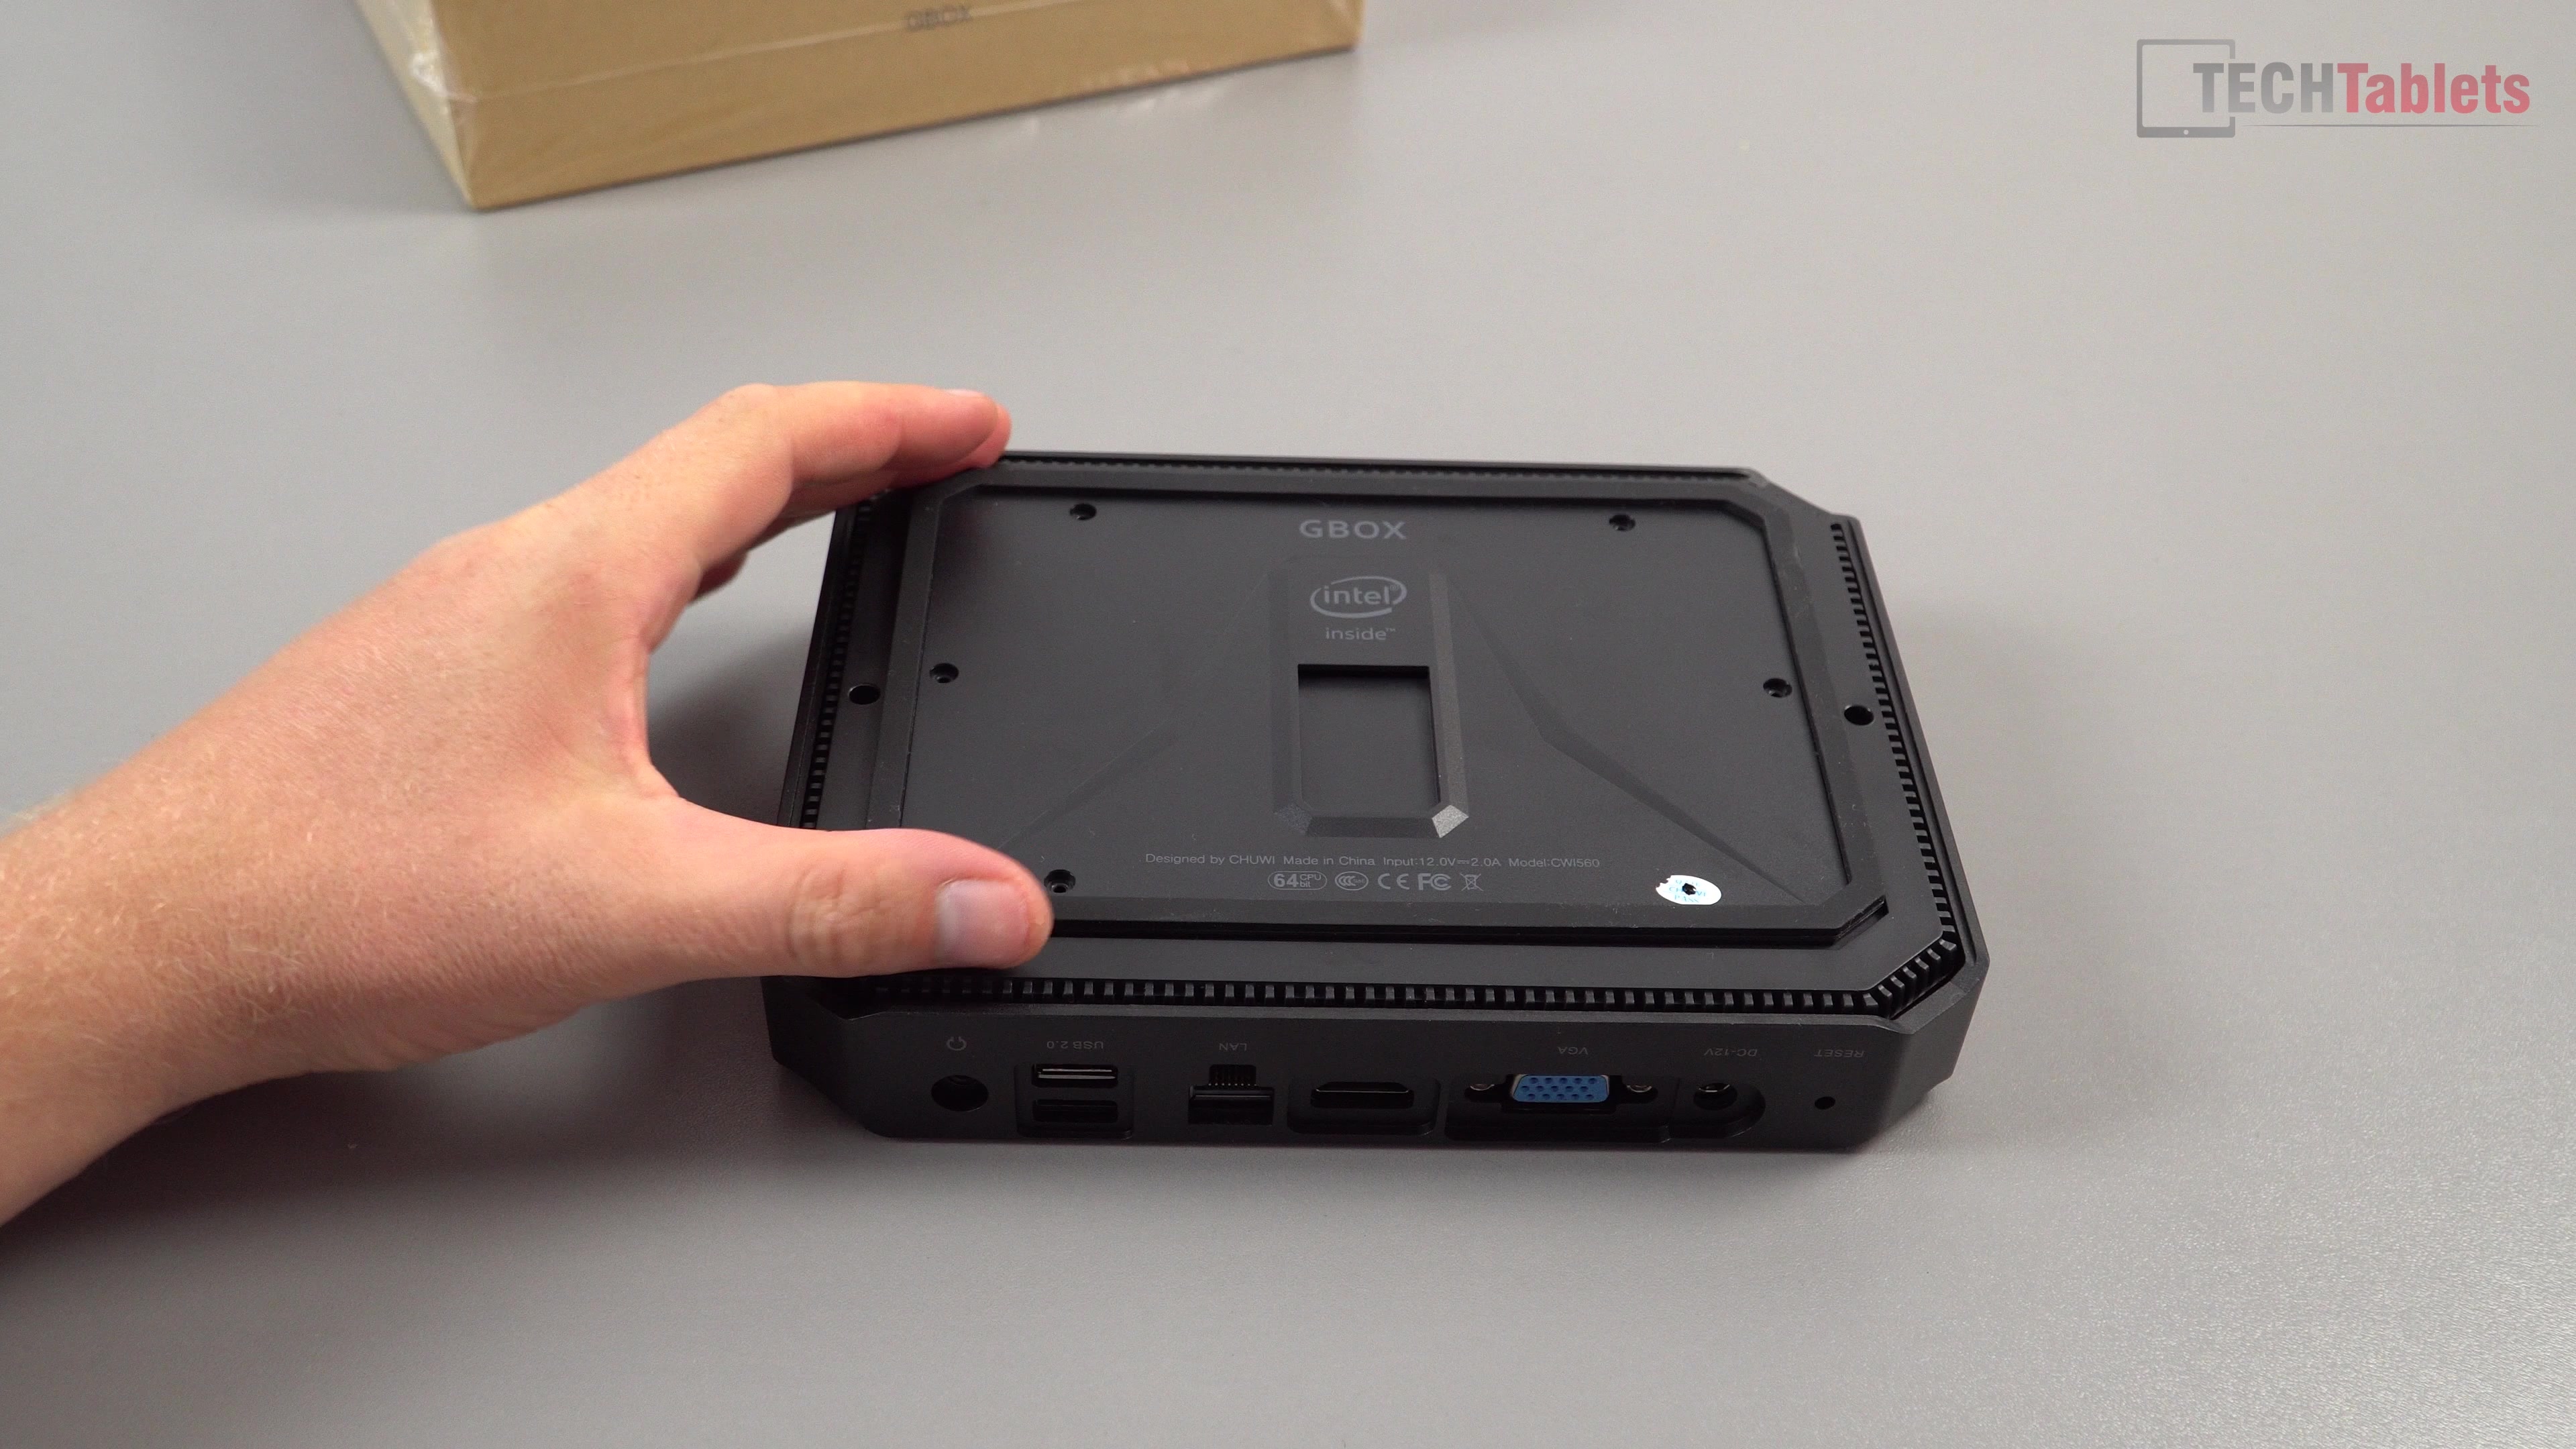 Chuwi GBox Review - Great Mini PC But Needs More RAM - TechTablets